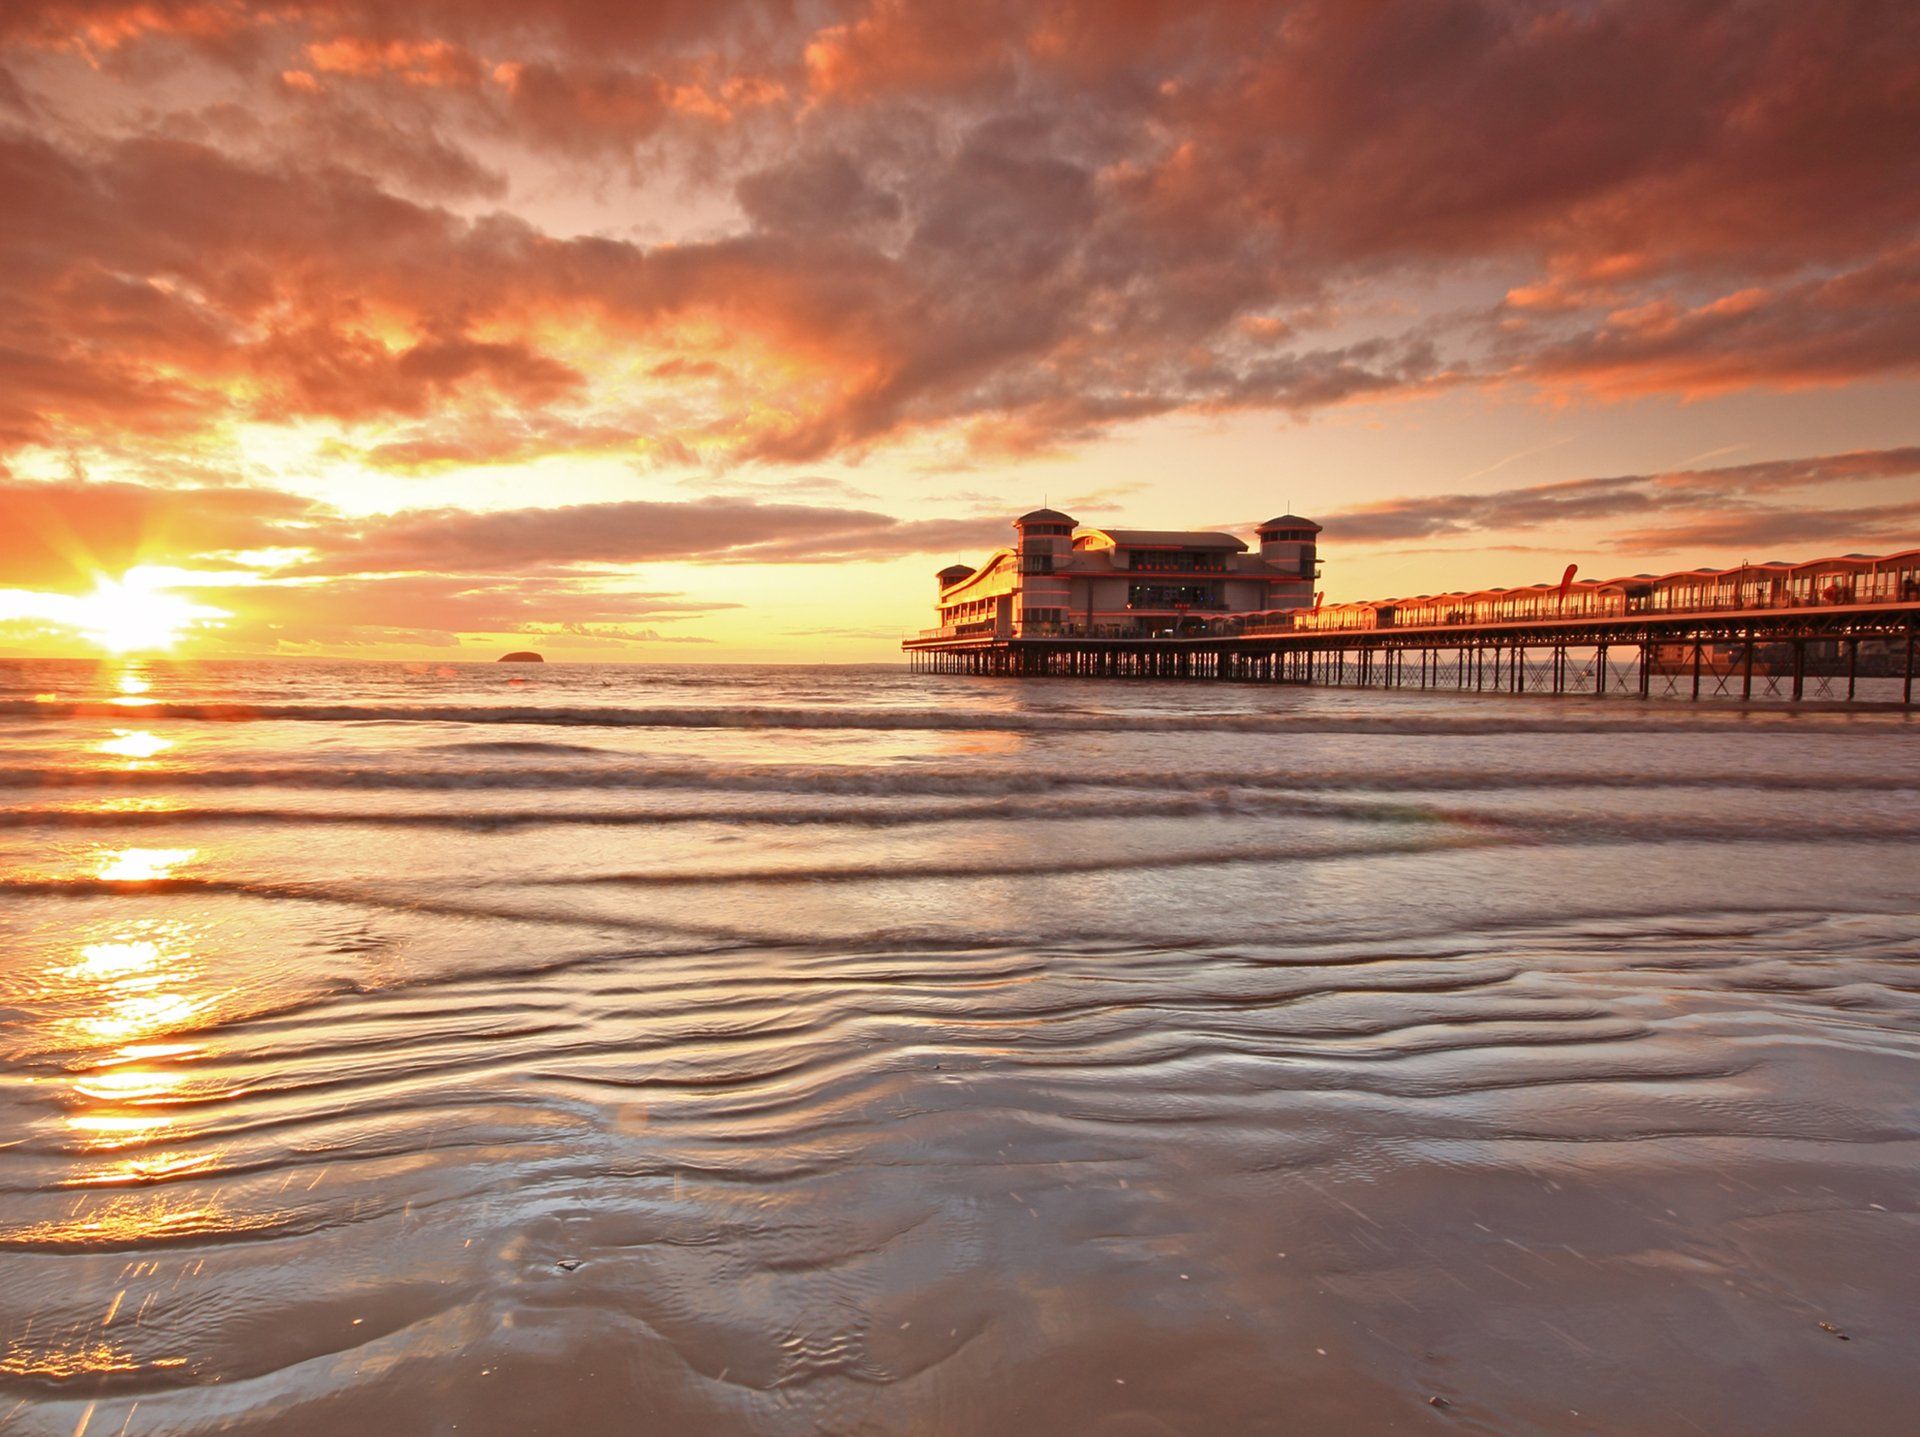 Weston Pier at sunset with the tide out in Somerset.